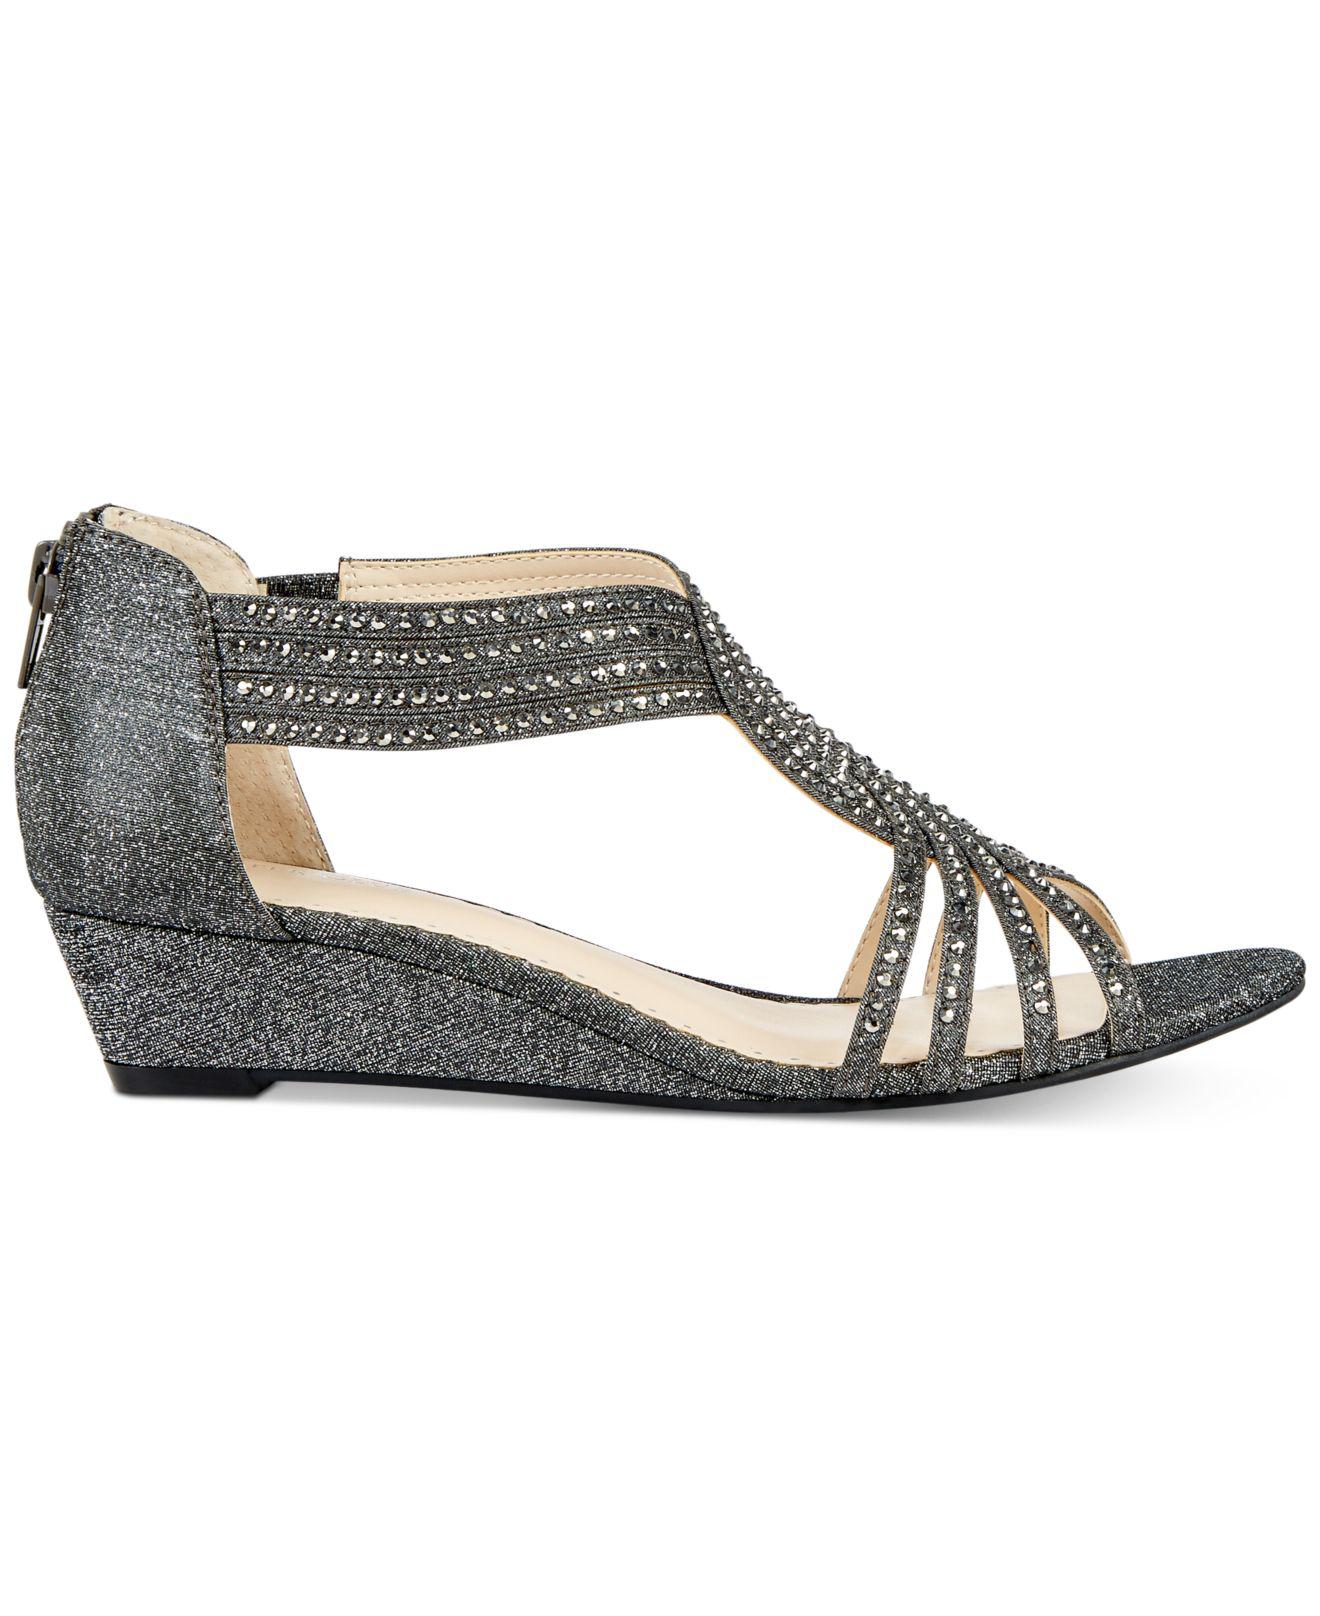 Lyst - Charter Club Ginifur Wedge Sandals, Created For Macy's